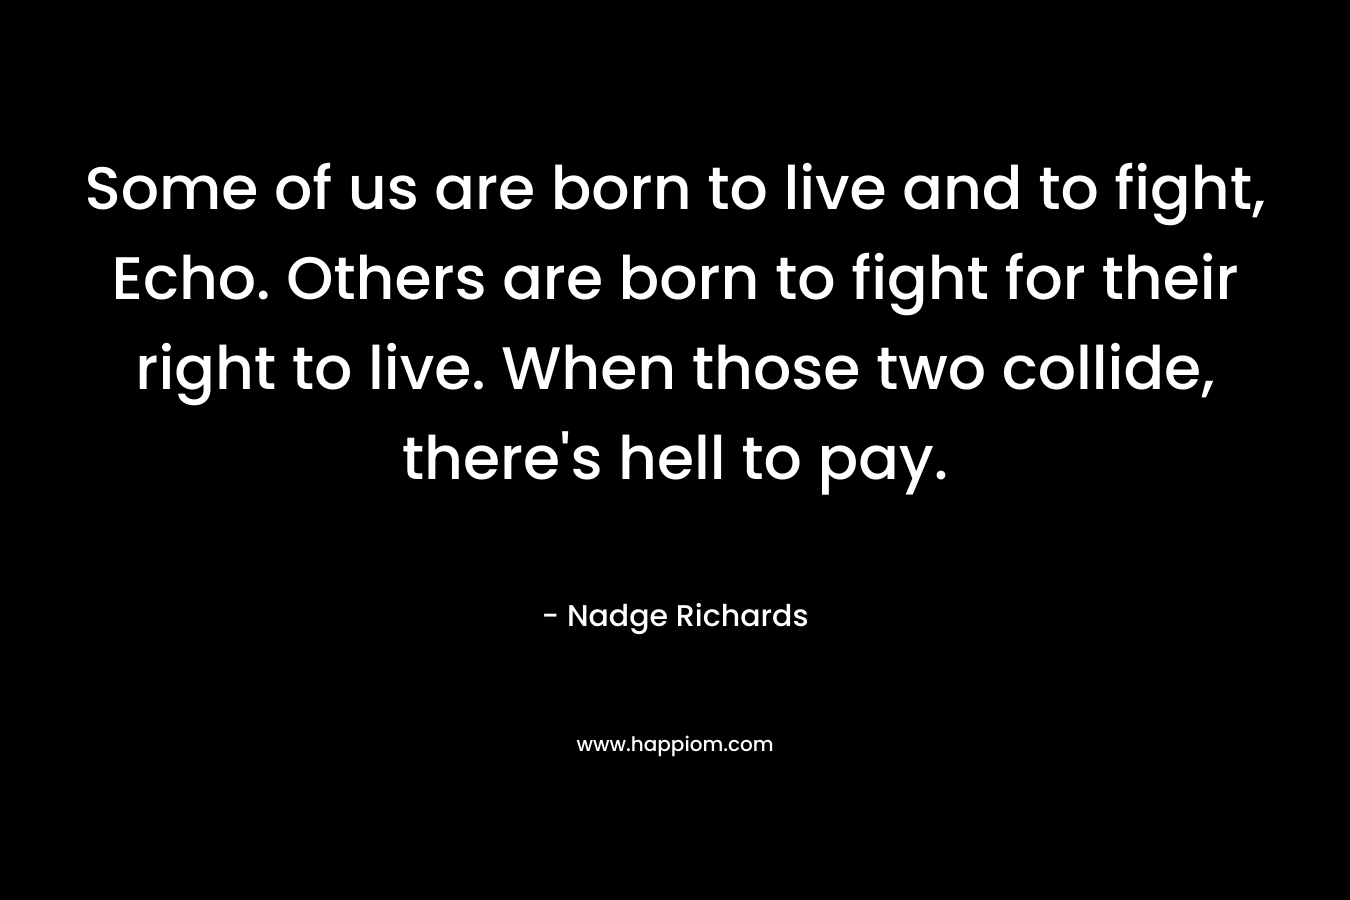 Some of us are born to live and to fight, Echo. Others are born to fight for their right to live. When those two collide, there’s hell to pay. – Nadge Richards